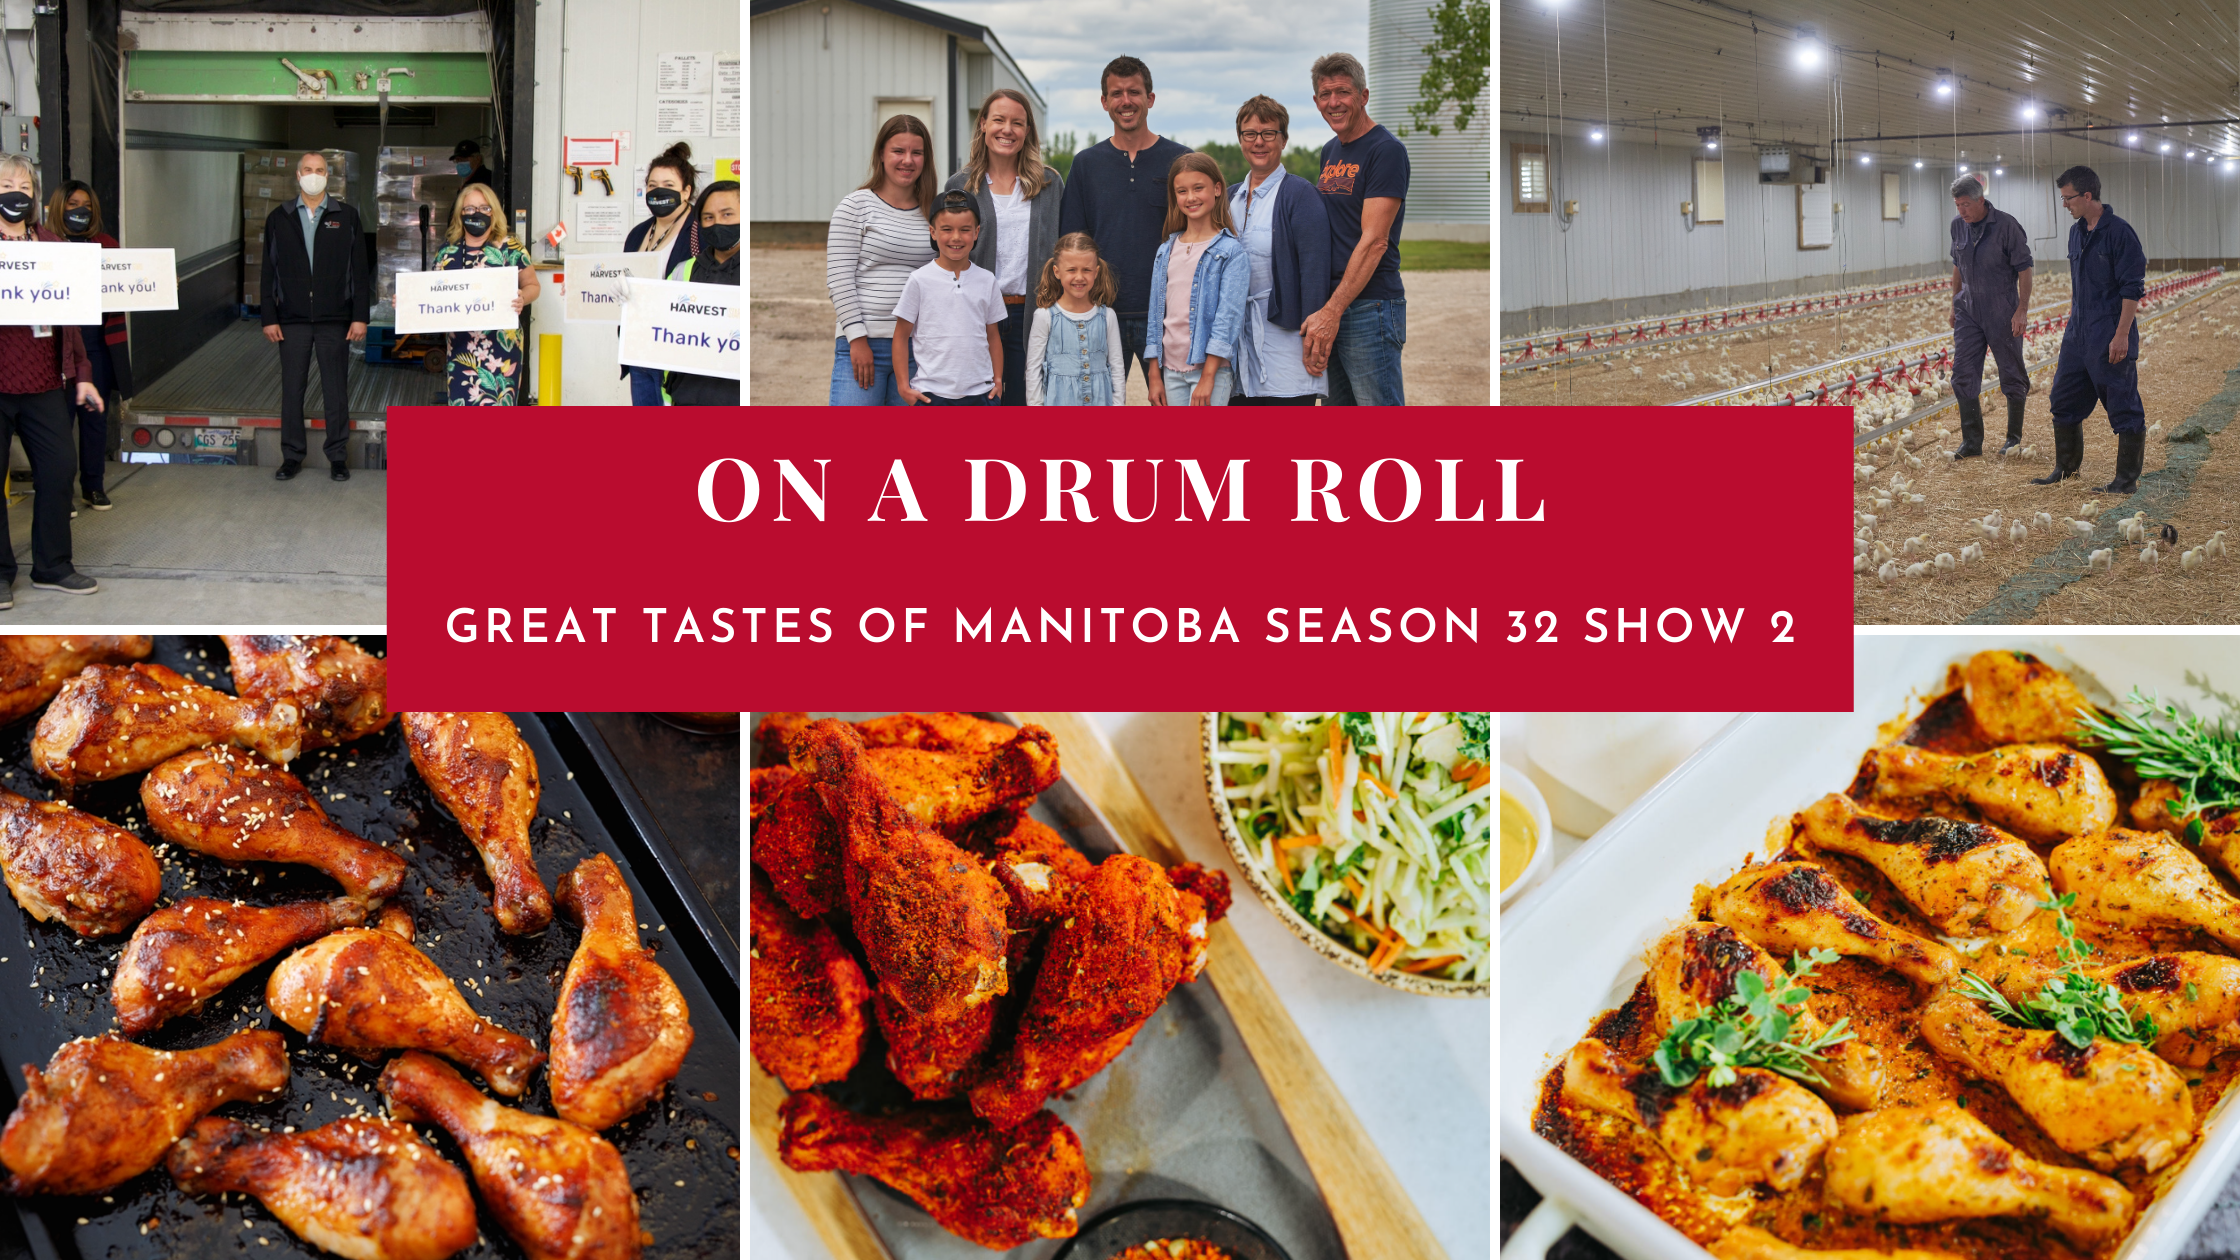 Great Tastes of Manitoba Season 32 Show 2 on a drum roll